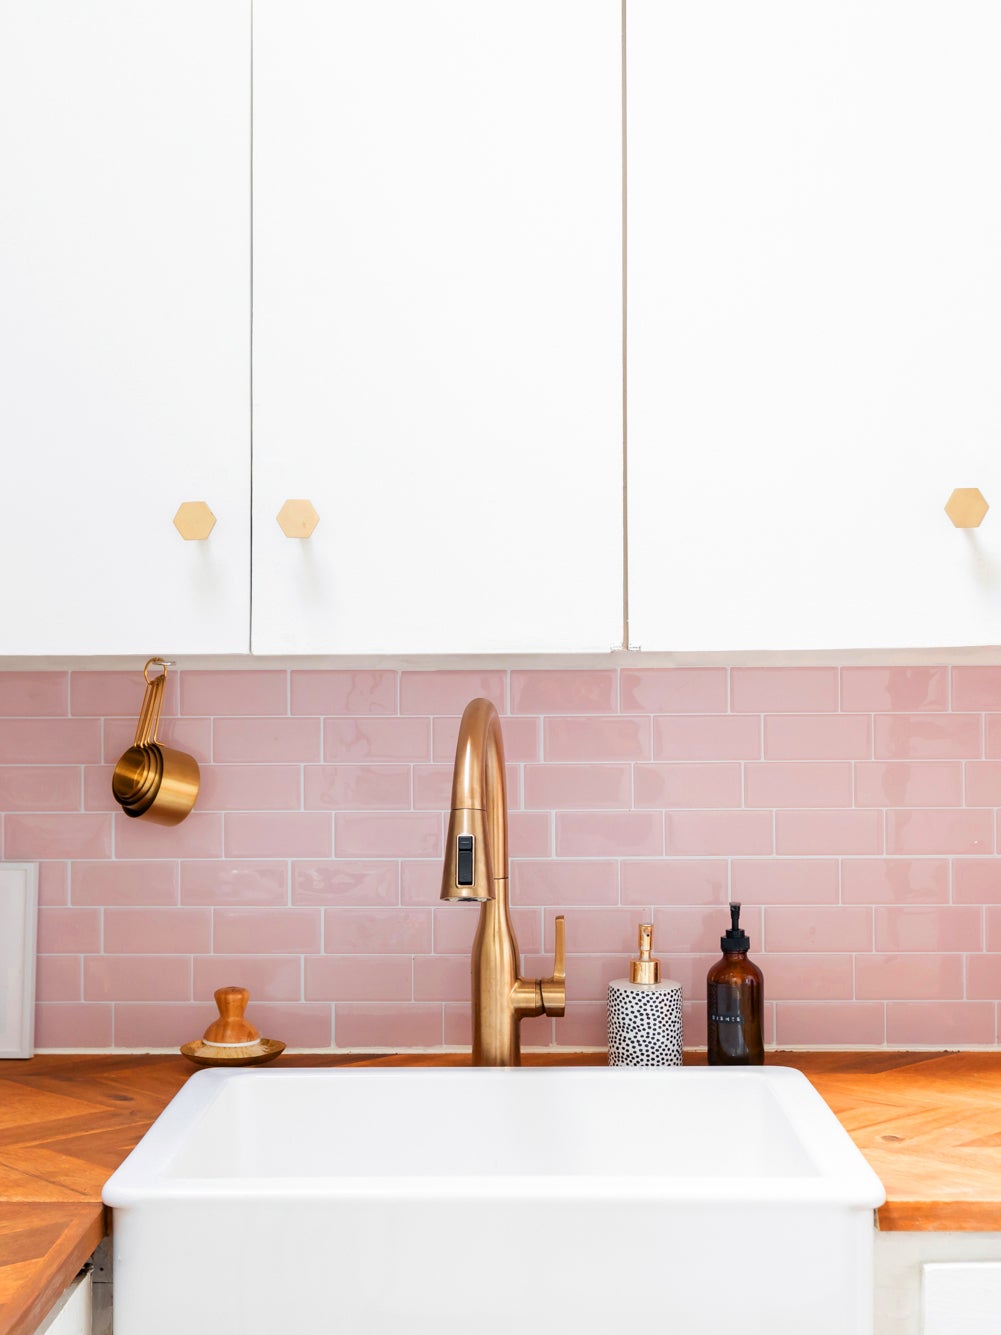 How to DIY a Peel-and-Stick Subway Tile Backsplash in 20 Minutes